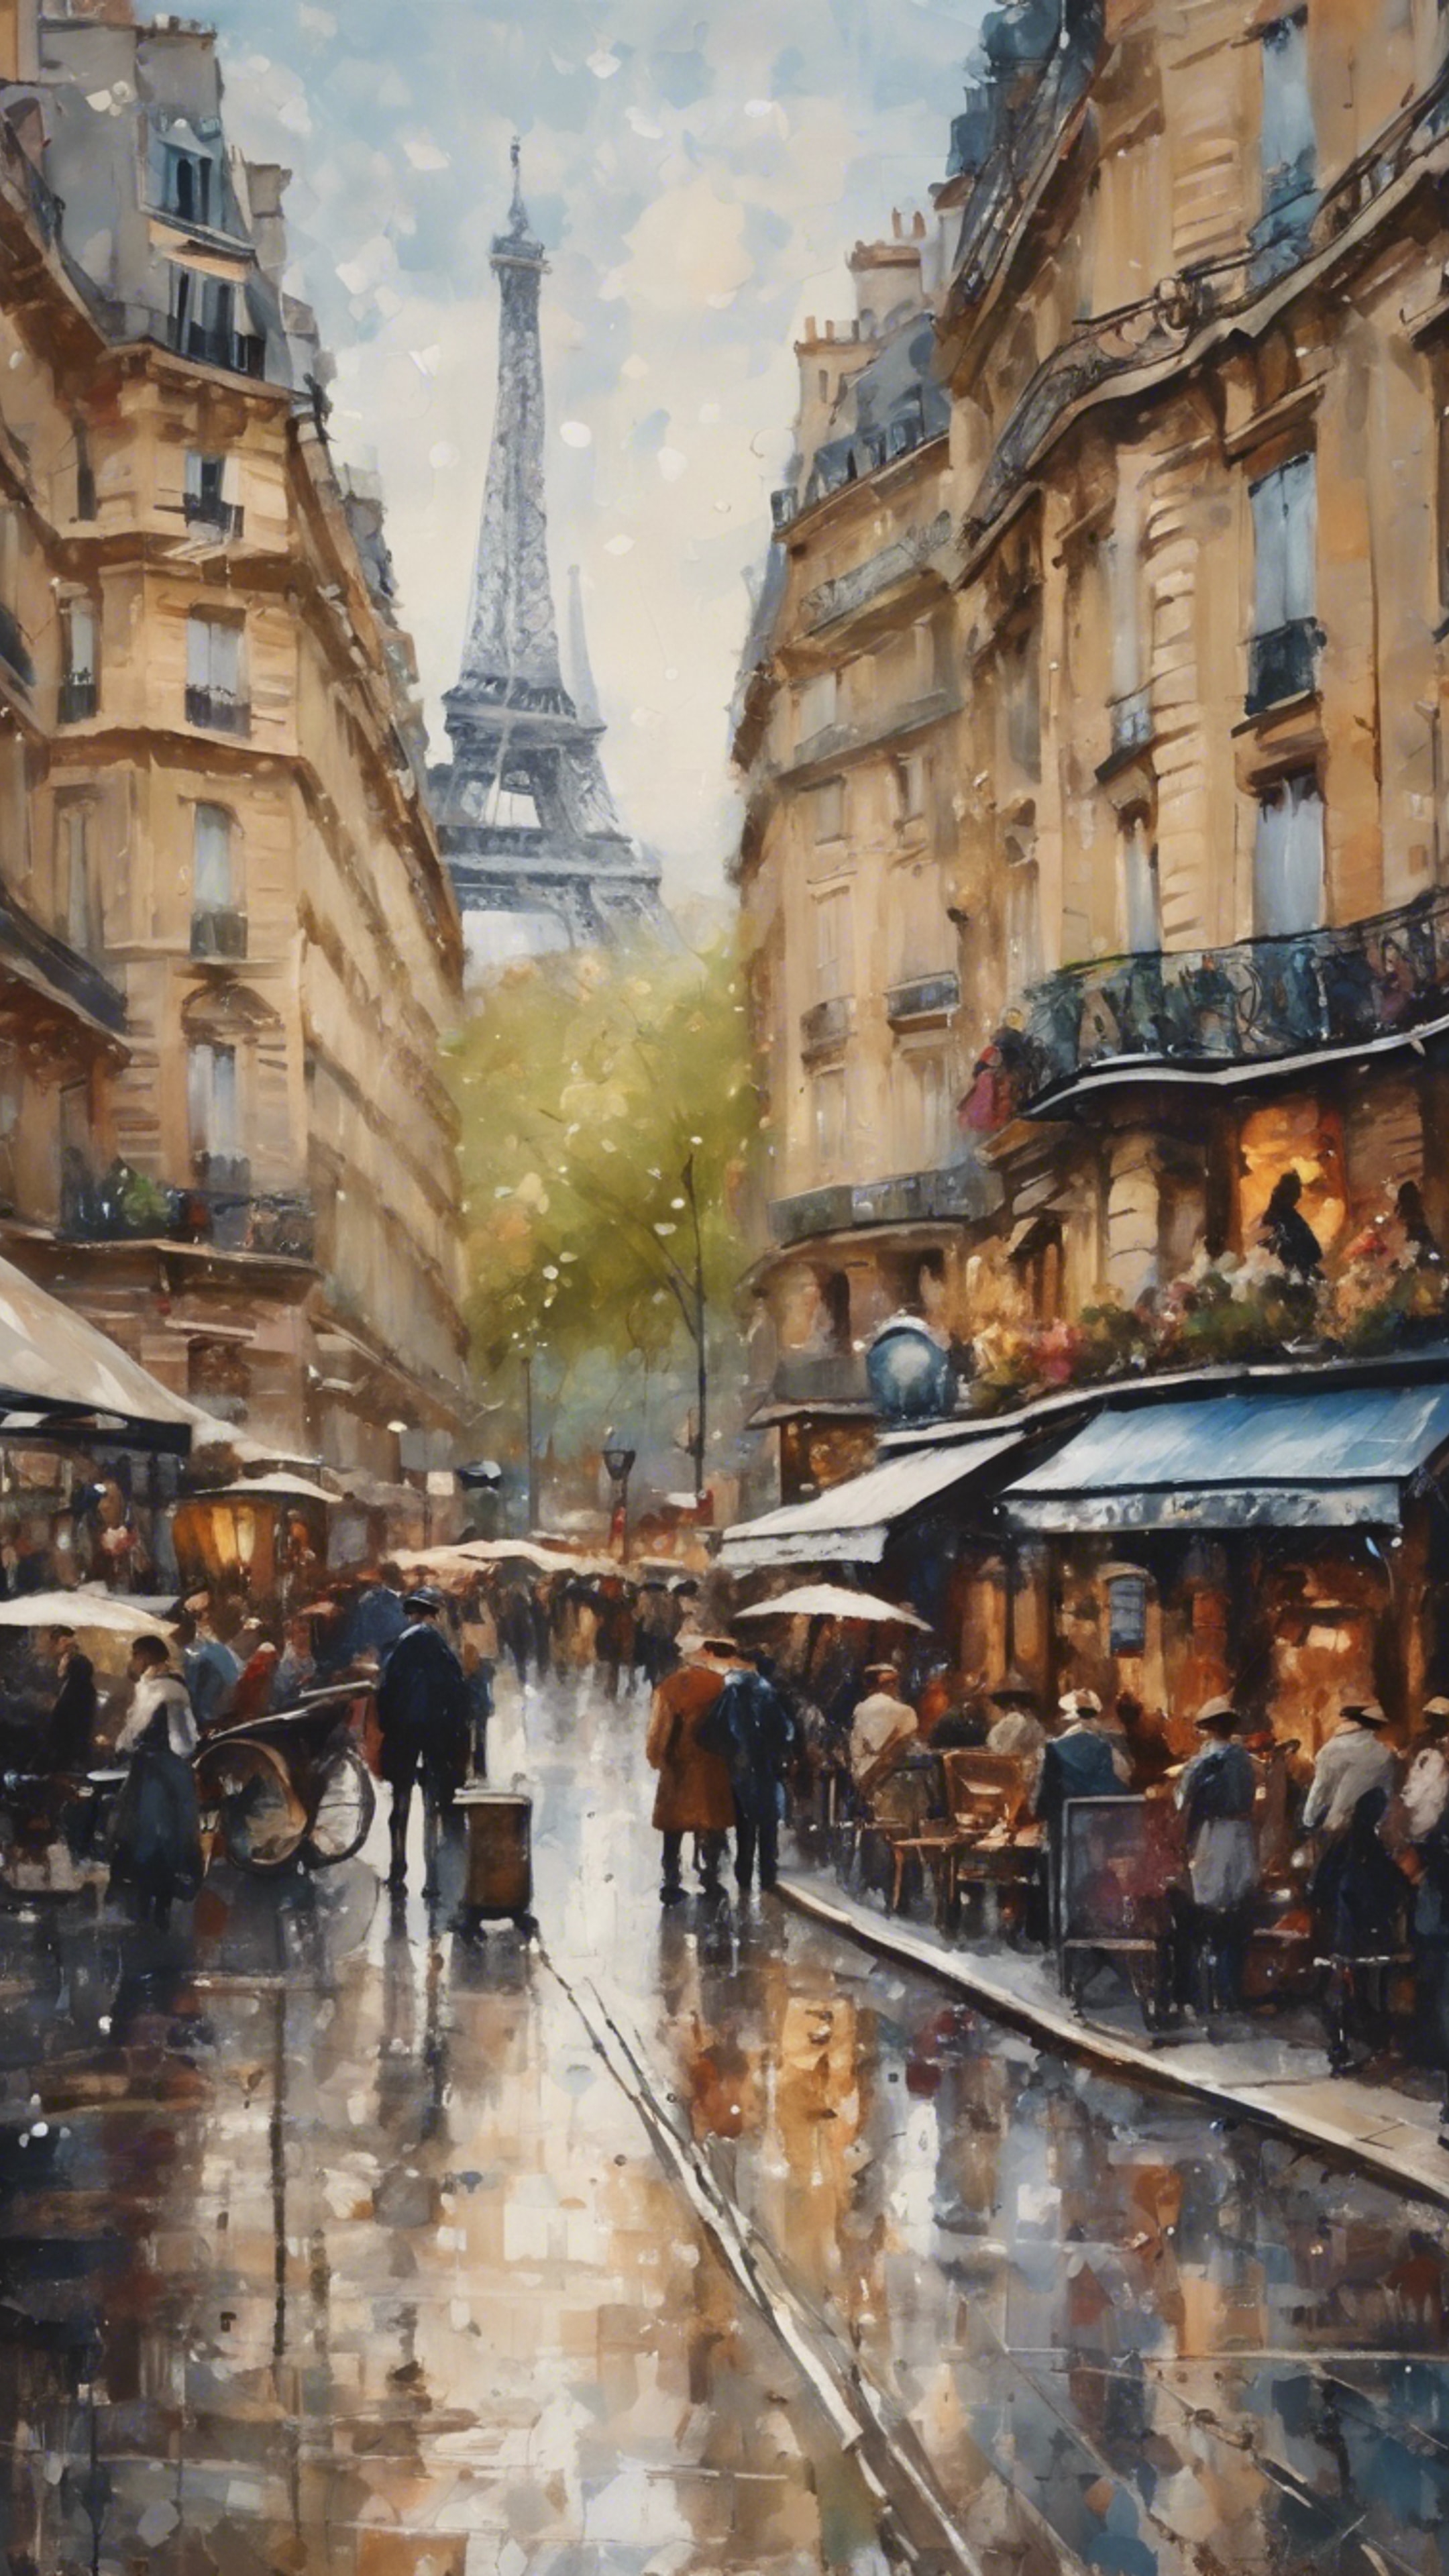 An impressionistic painting of a bustling Parisian street in the 19th century. Wallpaper[cd696b103ef84e098ff4]